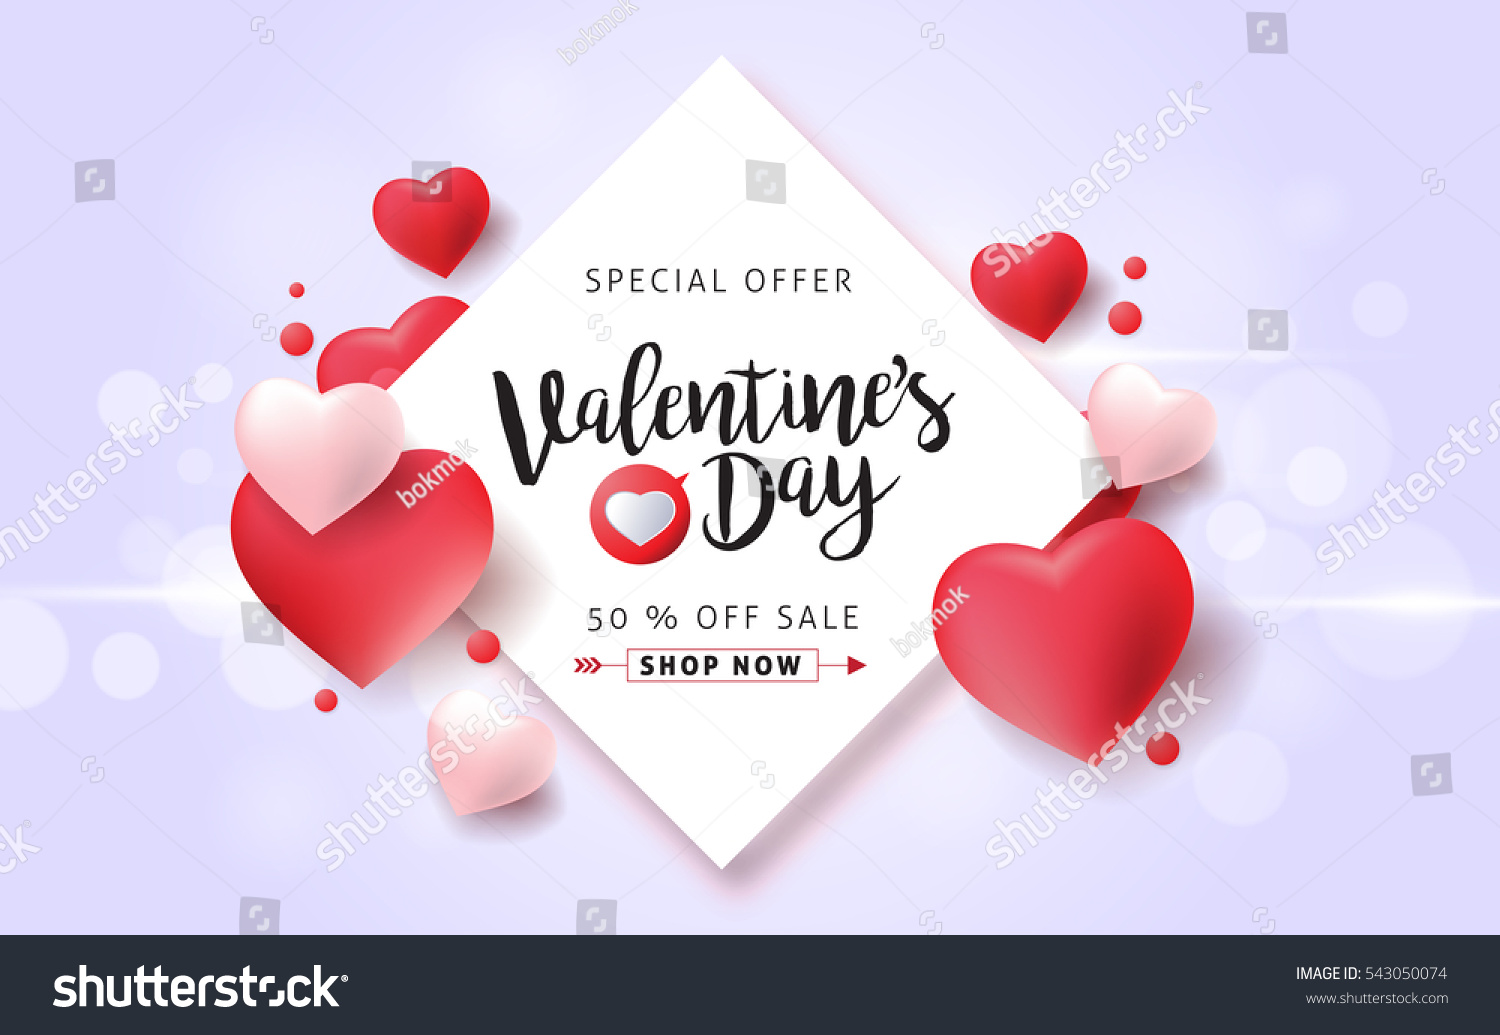 Valentines day sale background with balloons heart. Vector illustration. Wallpaper, flyers, invitation, posters, brochure, banners. #543050074